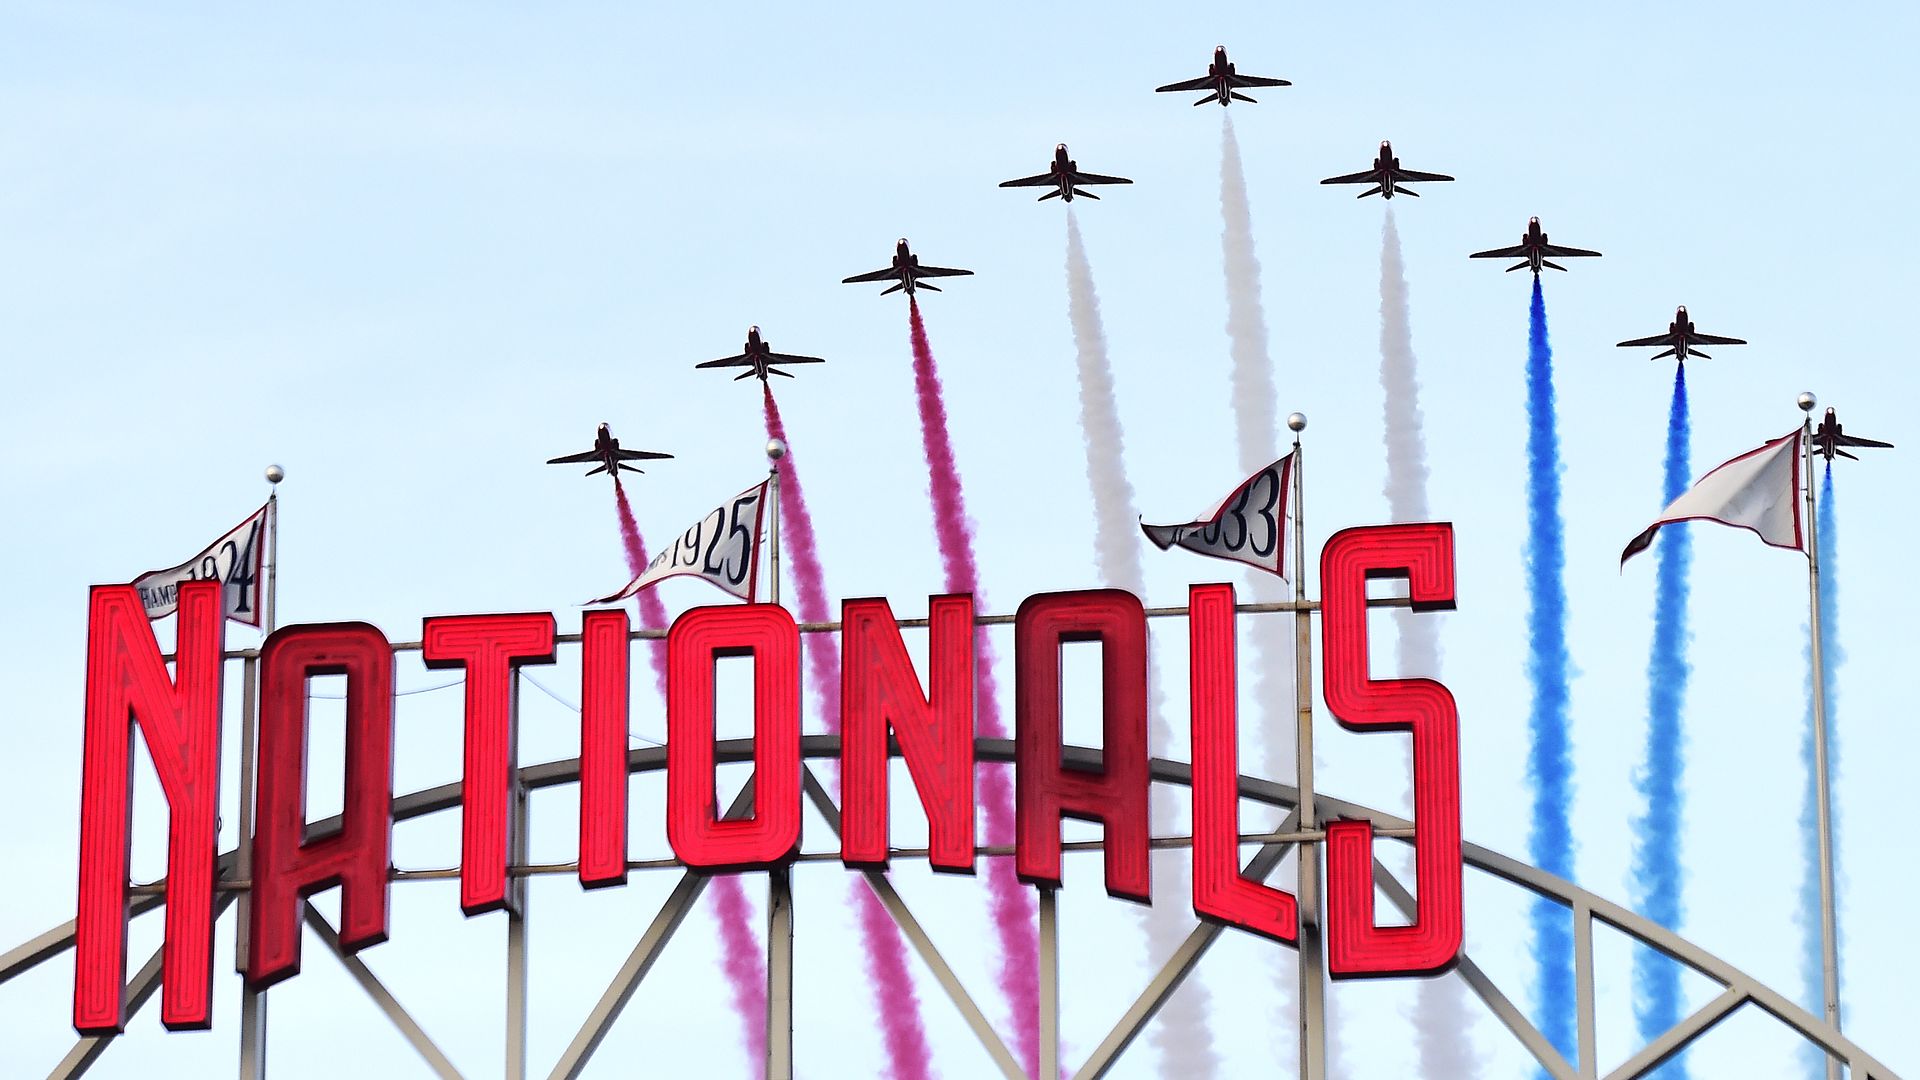 Planes lift off in formation above the Washington Nationals marquee at Nats Park in Washington, D.C. 